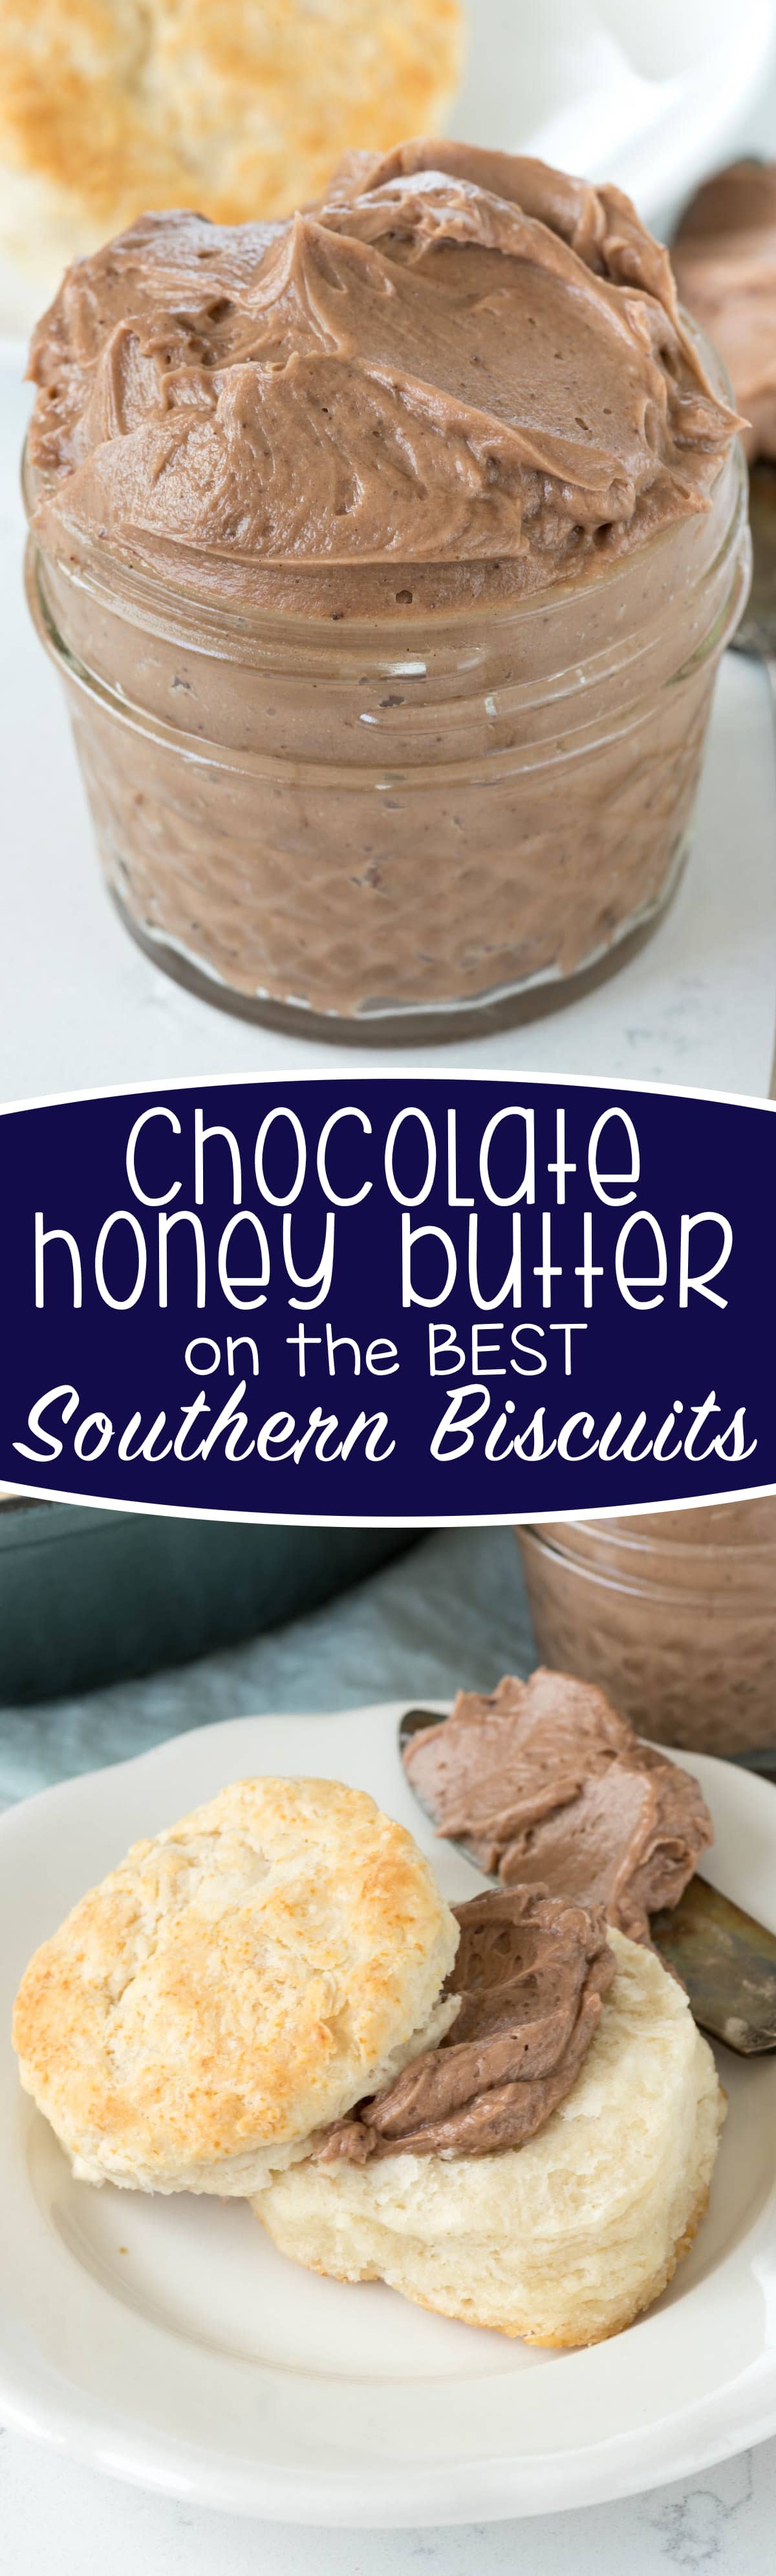 Chocolate Honey Butter - this recipe is so easy and indulgent! Whip butter with honey and cocoa for the BEST spread for biscuits. We couldn't stop eating it!